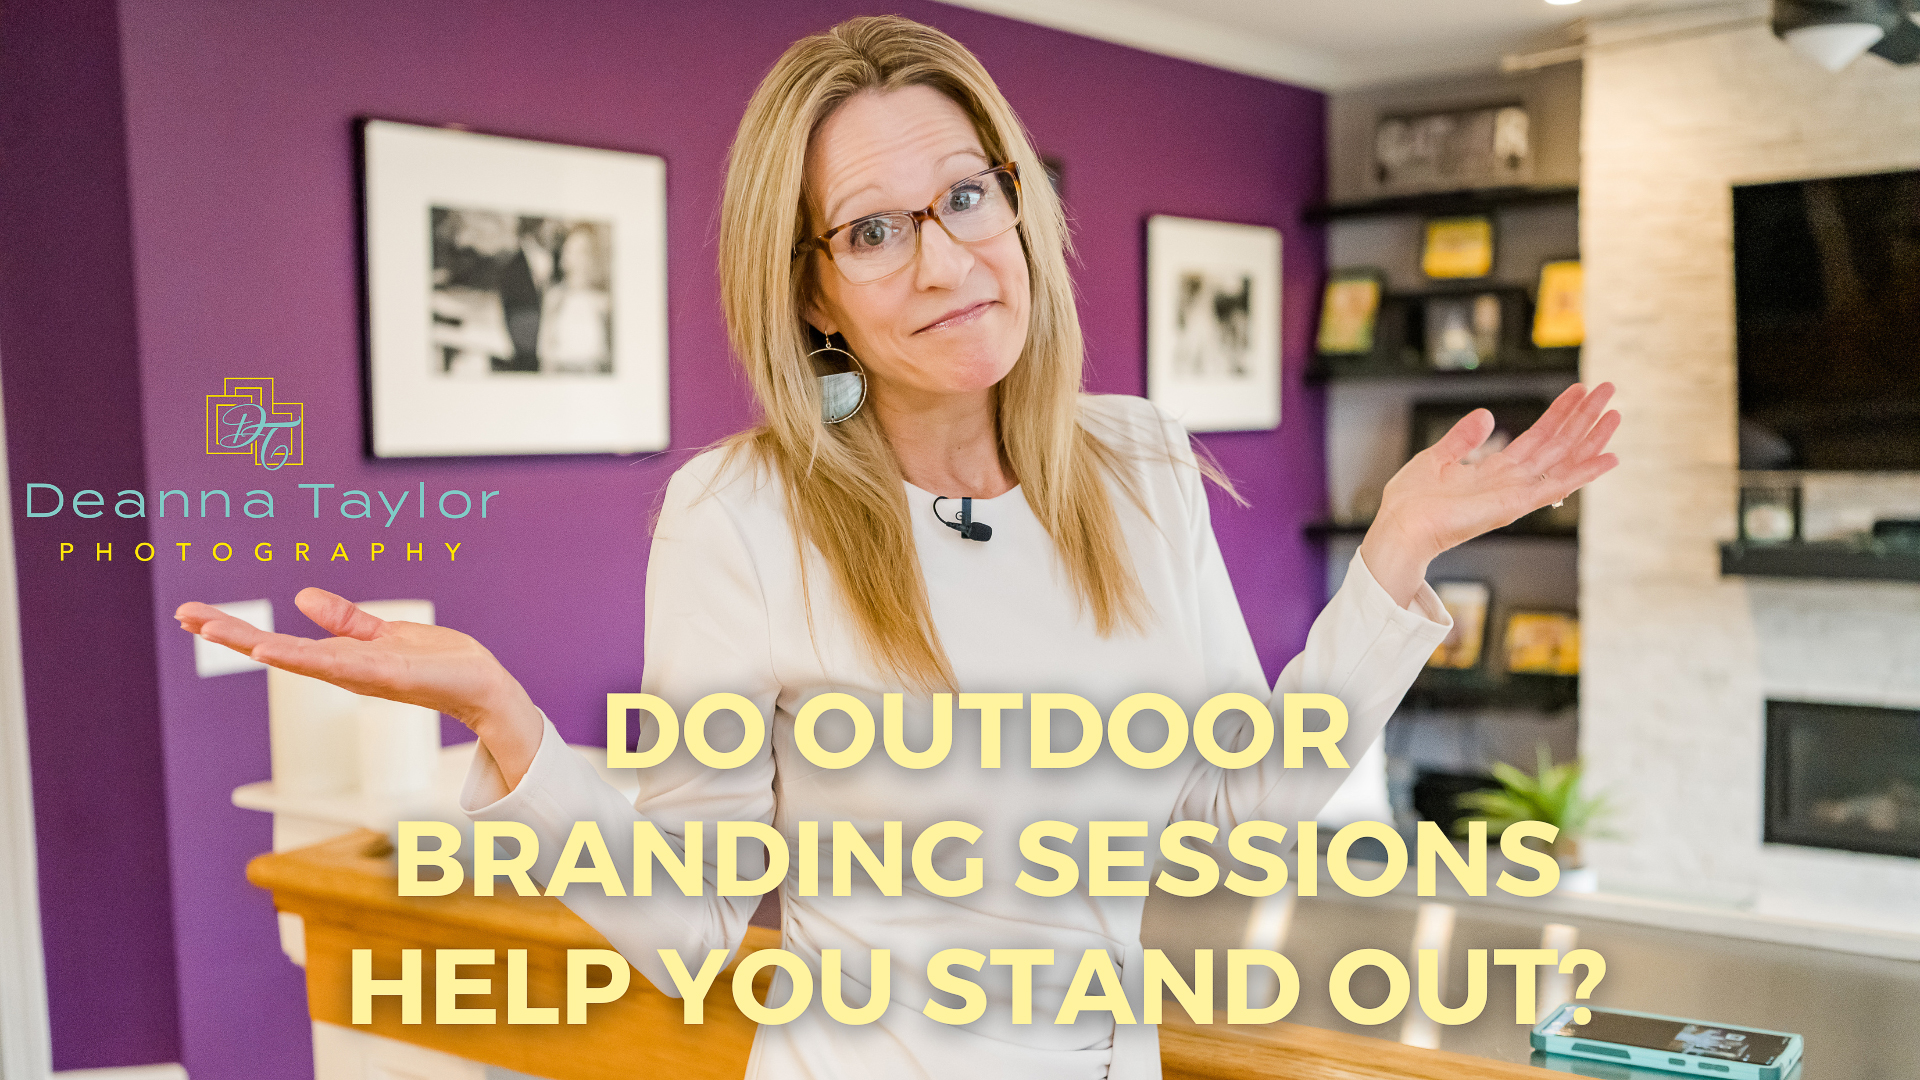 Woman with her hands up asking "Do Outdoor Branding Sessions Help You Stand Out?"